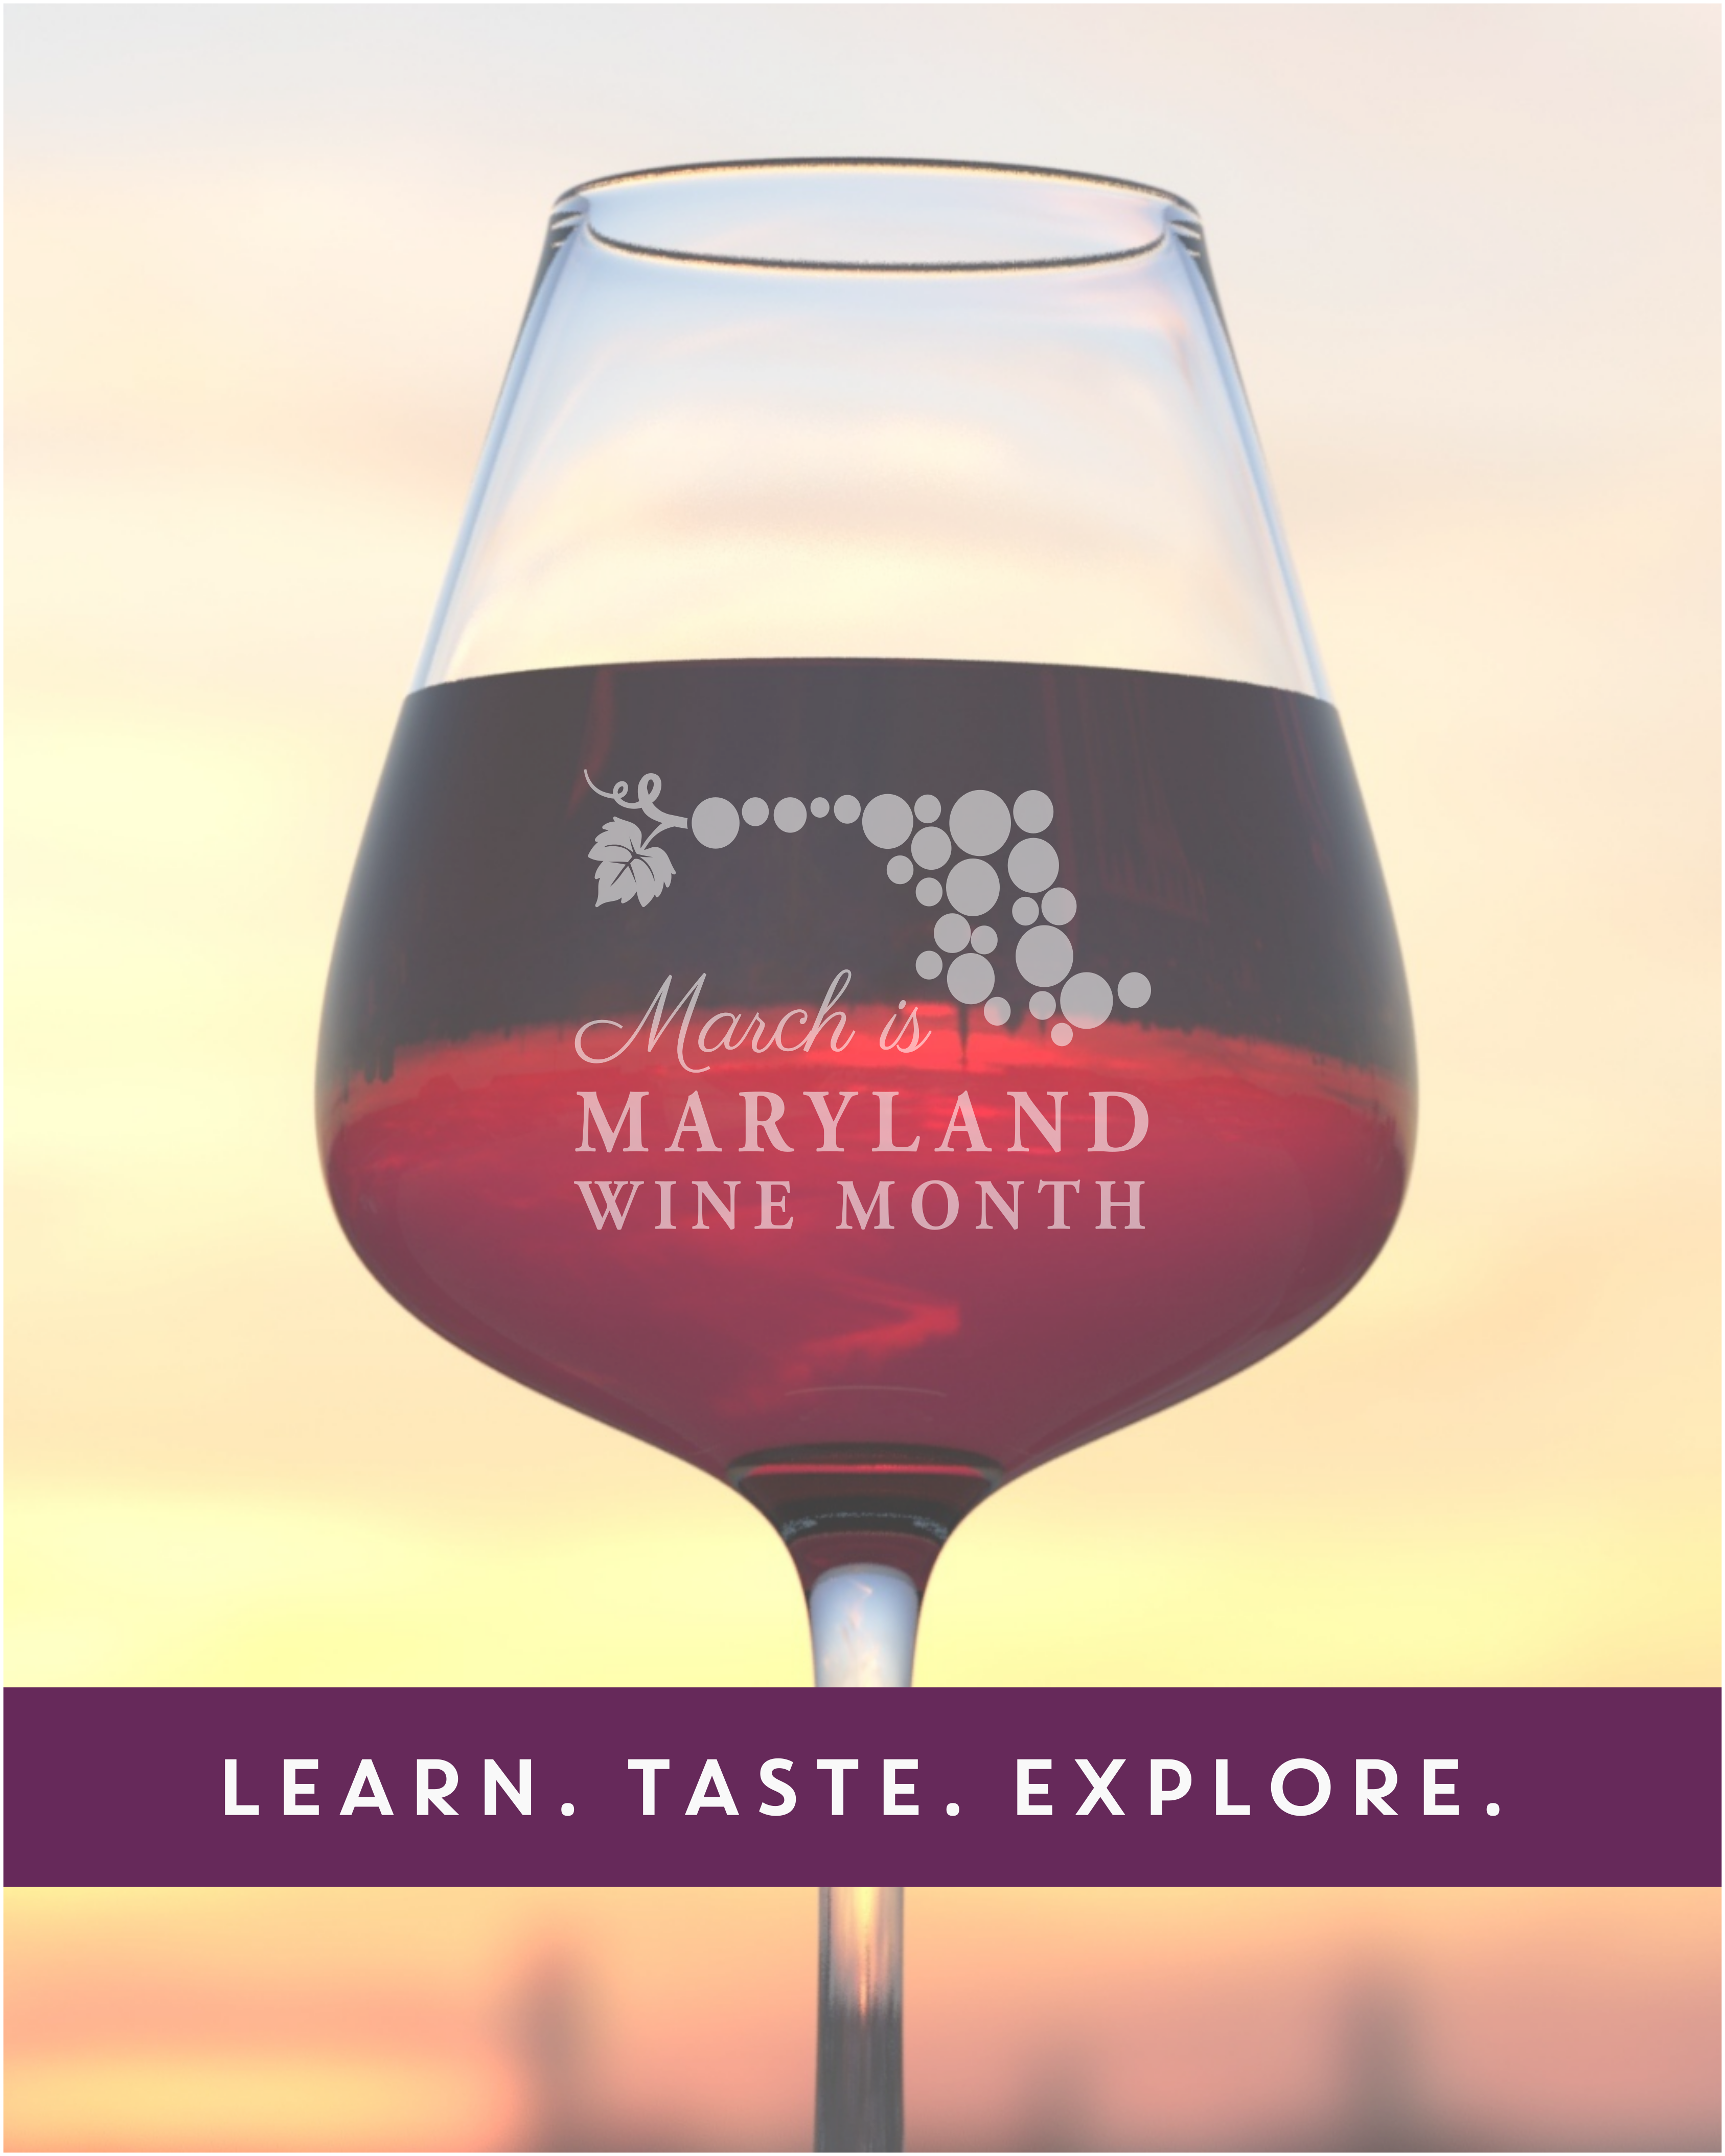 March is Maryland Wine Month logo etched on glass. Banner underneath reads, "Learn. Taste. Explore."